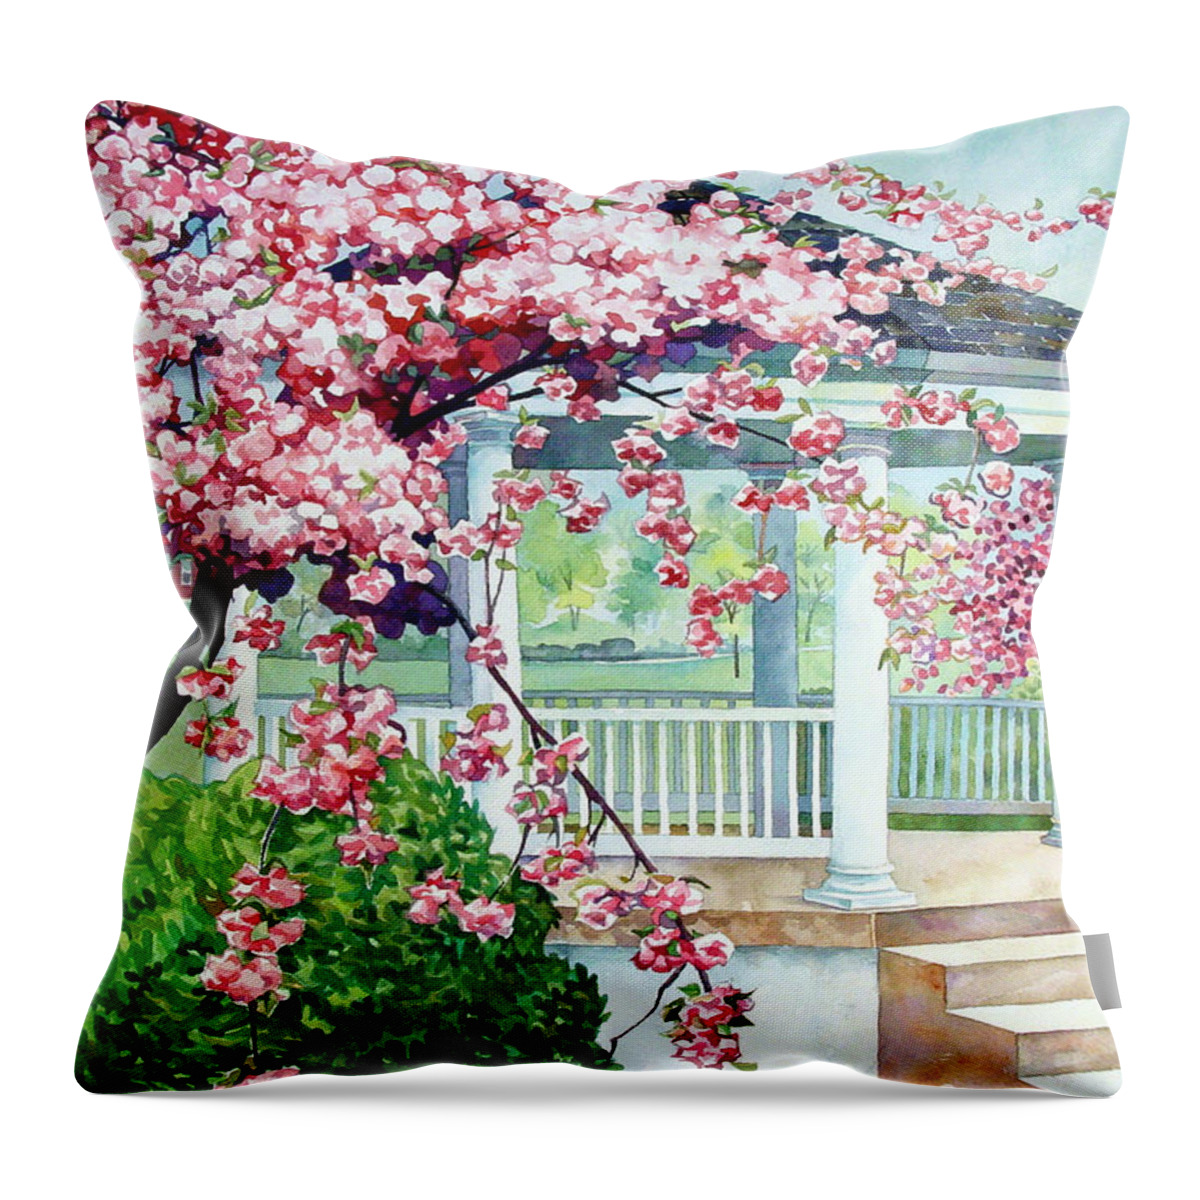 Watercolor Throw Pillow featuring the painting Gazeebo by Mick Williams